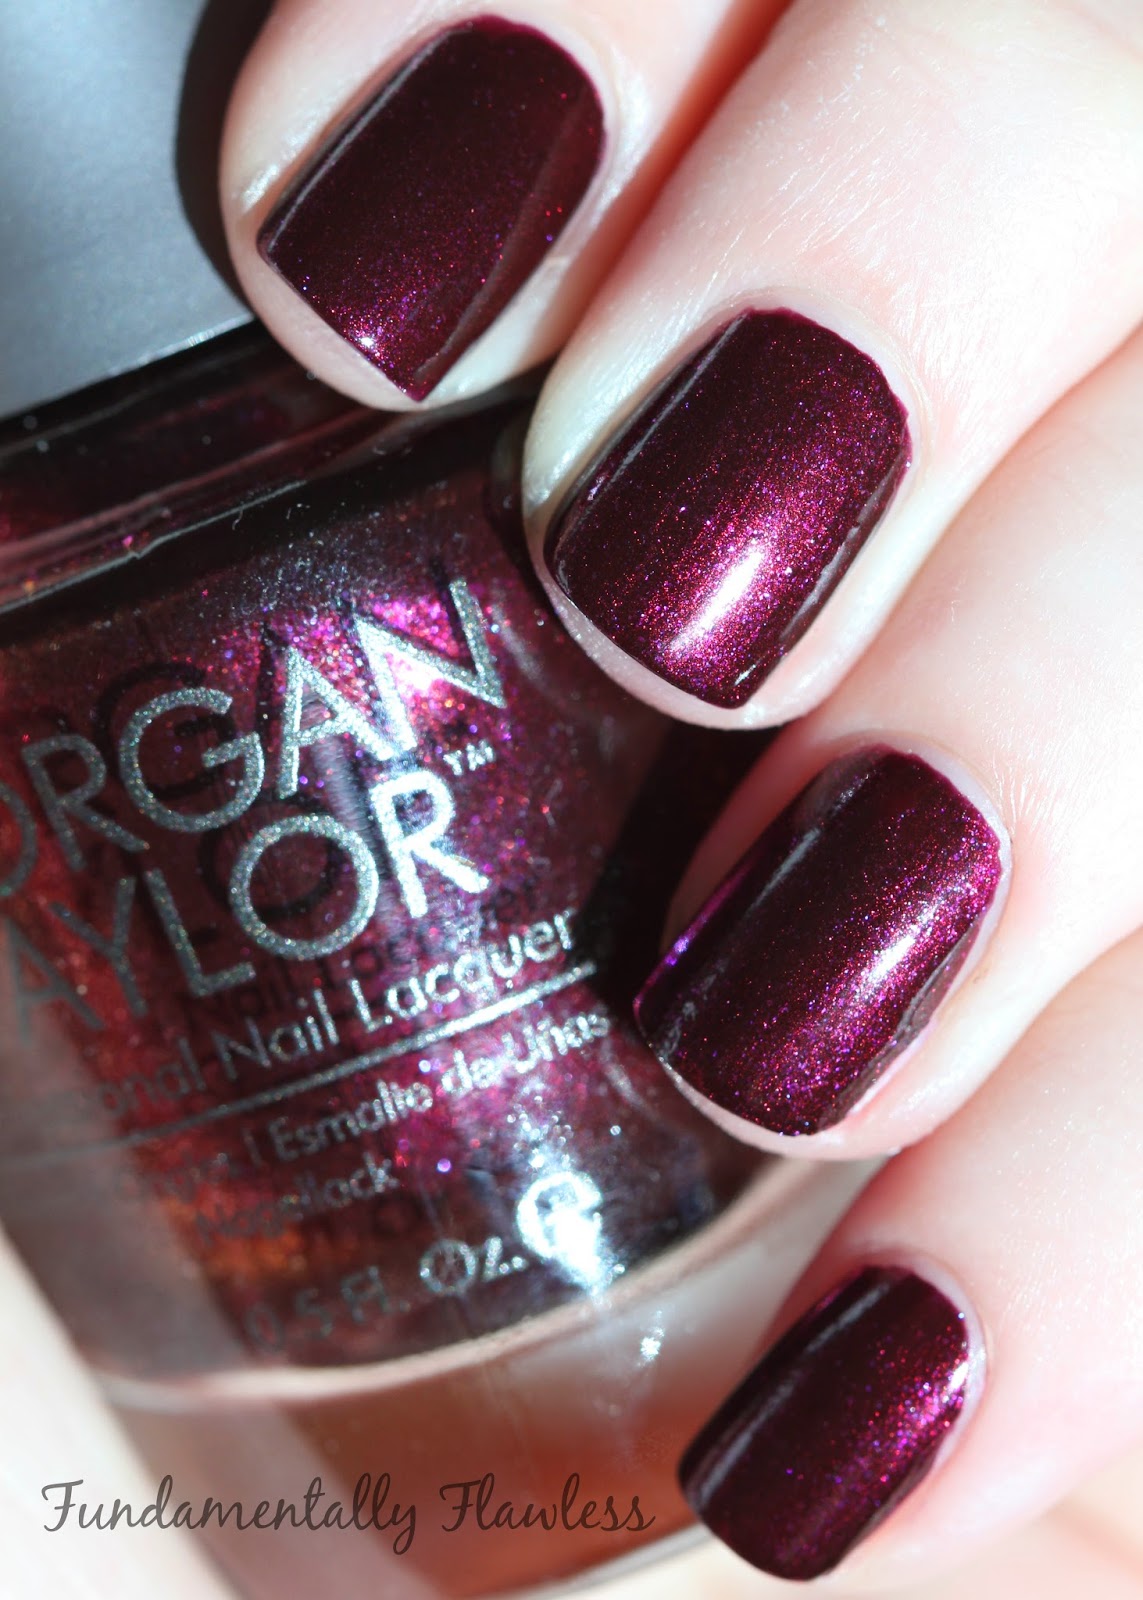 Morgan Taylor Glam Rock Rebel With A Cause swatch